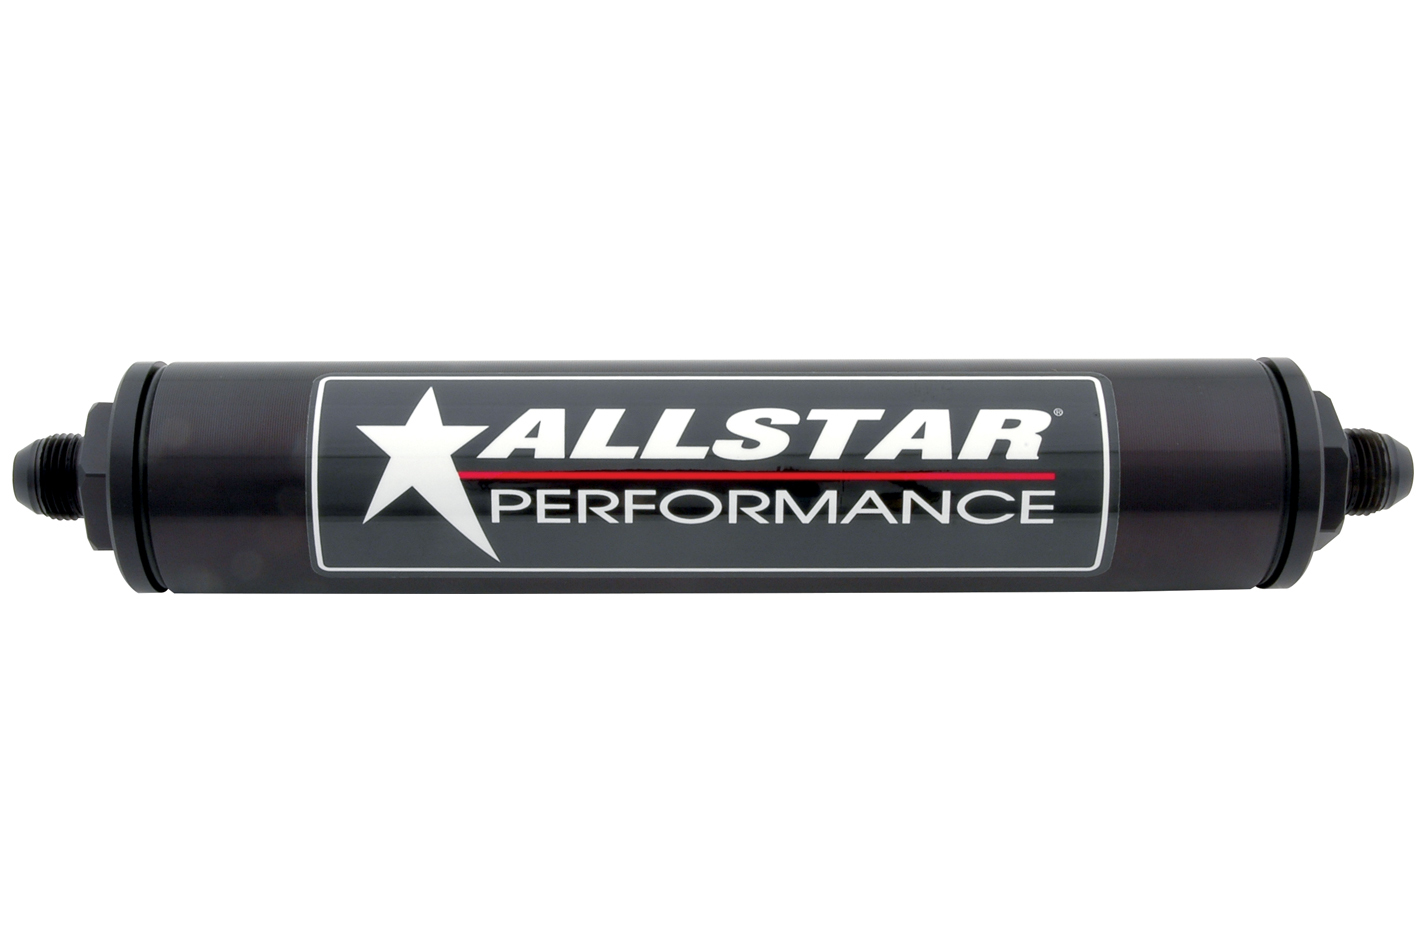 Allstar Performance 40239 Fuel Filter, In-Line, 63 Micron, Stainless Element, 6 AN Male Inlet, 6 AN Male Outlet, Aluminum, Black Anodized, Each